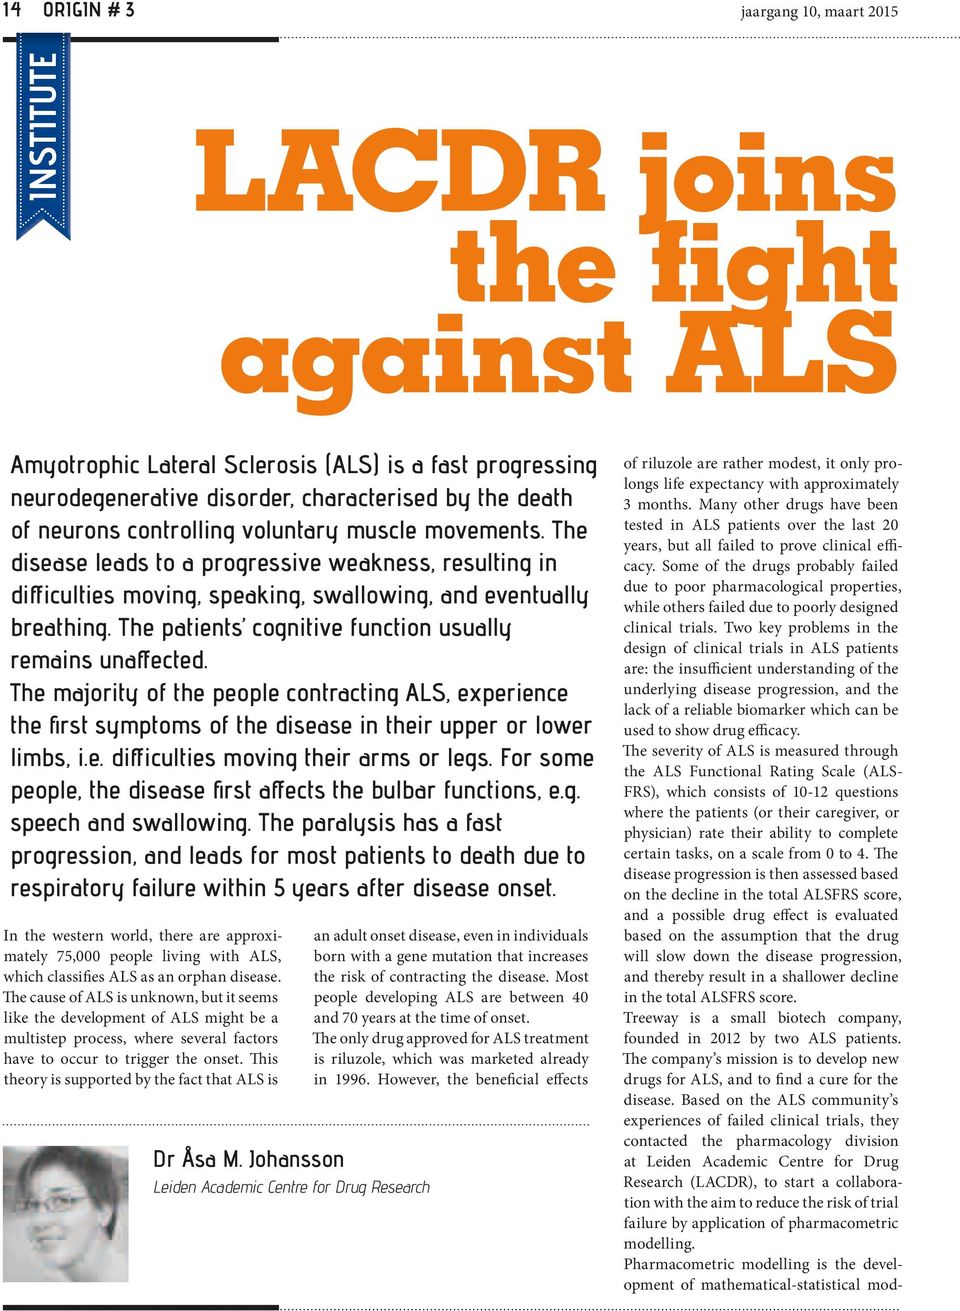 The patients cognitive function usually remains unaffected. The majority of the people contracting ALS, experience the first symptoms of the disease in their upper or lower limbs, i.e. difficulties moving their arms or legs.